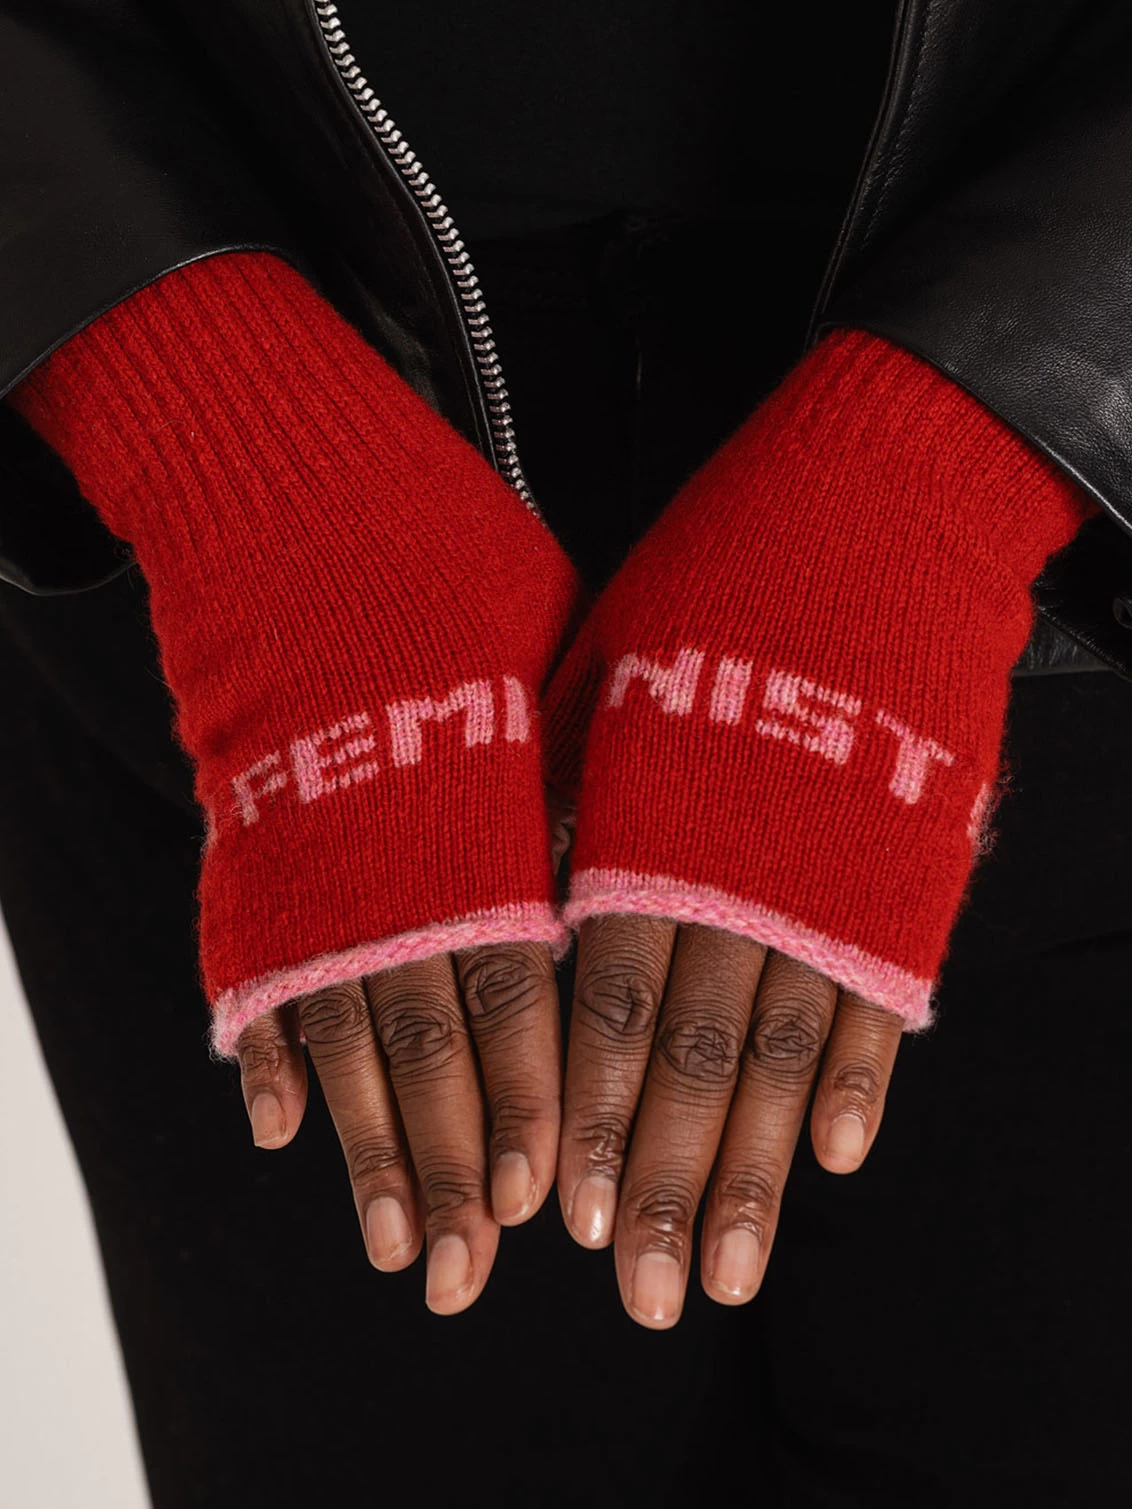 Red feminist mittens on a black womans hands